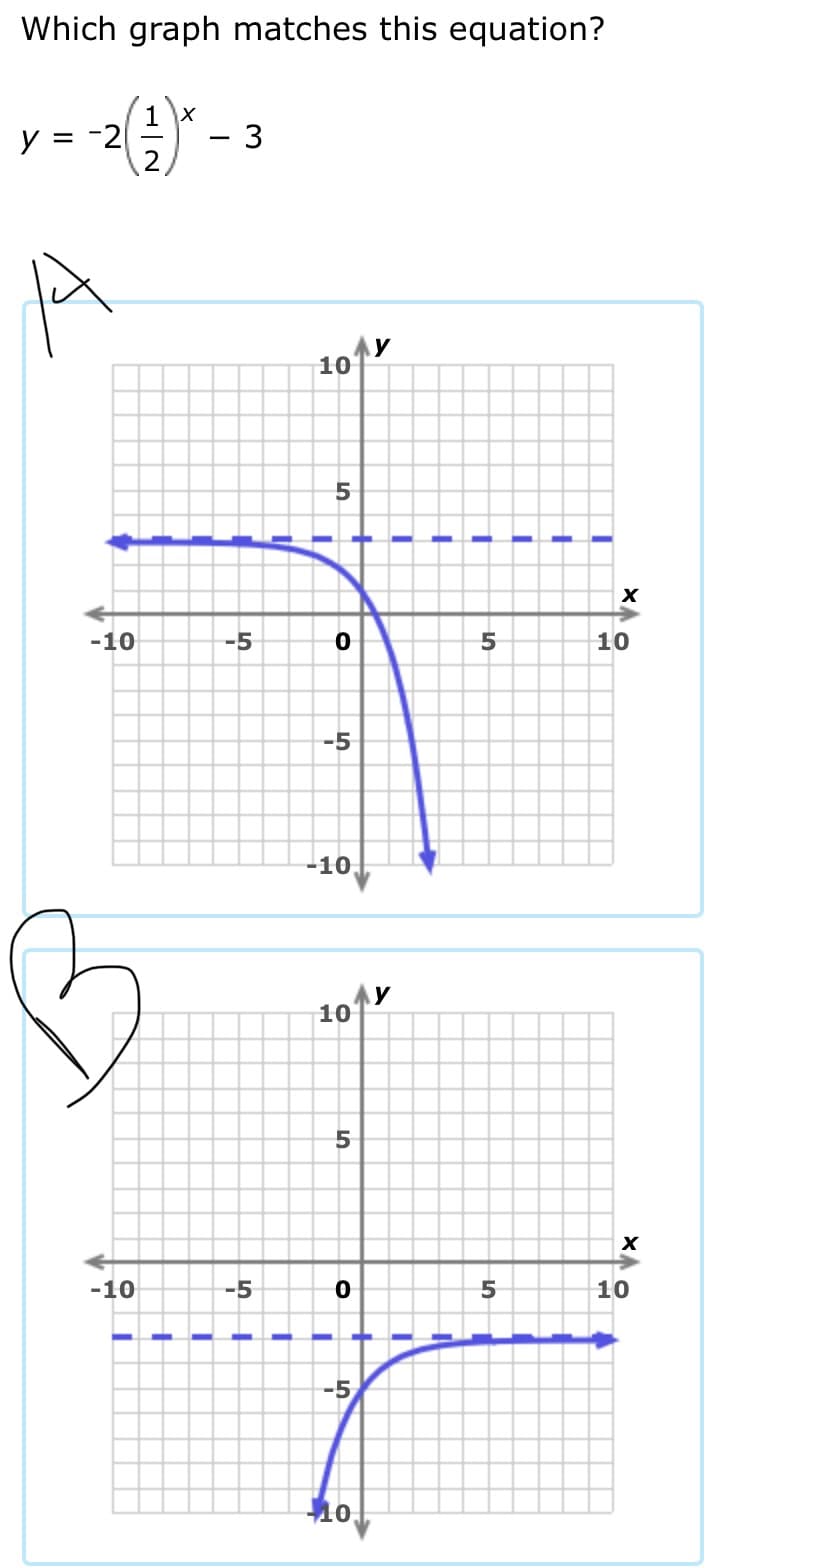 Which graph matches this equation?
y = -2
y
10
-10
-5
10
-5
-10,
y
10
5
-10
-5
10
-5
+
